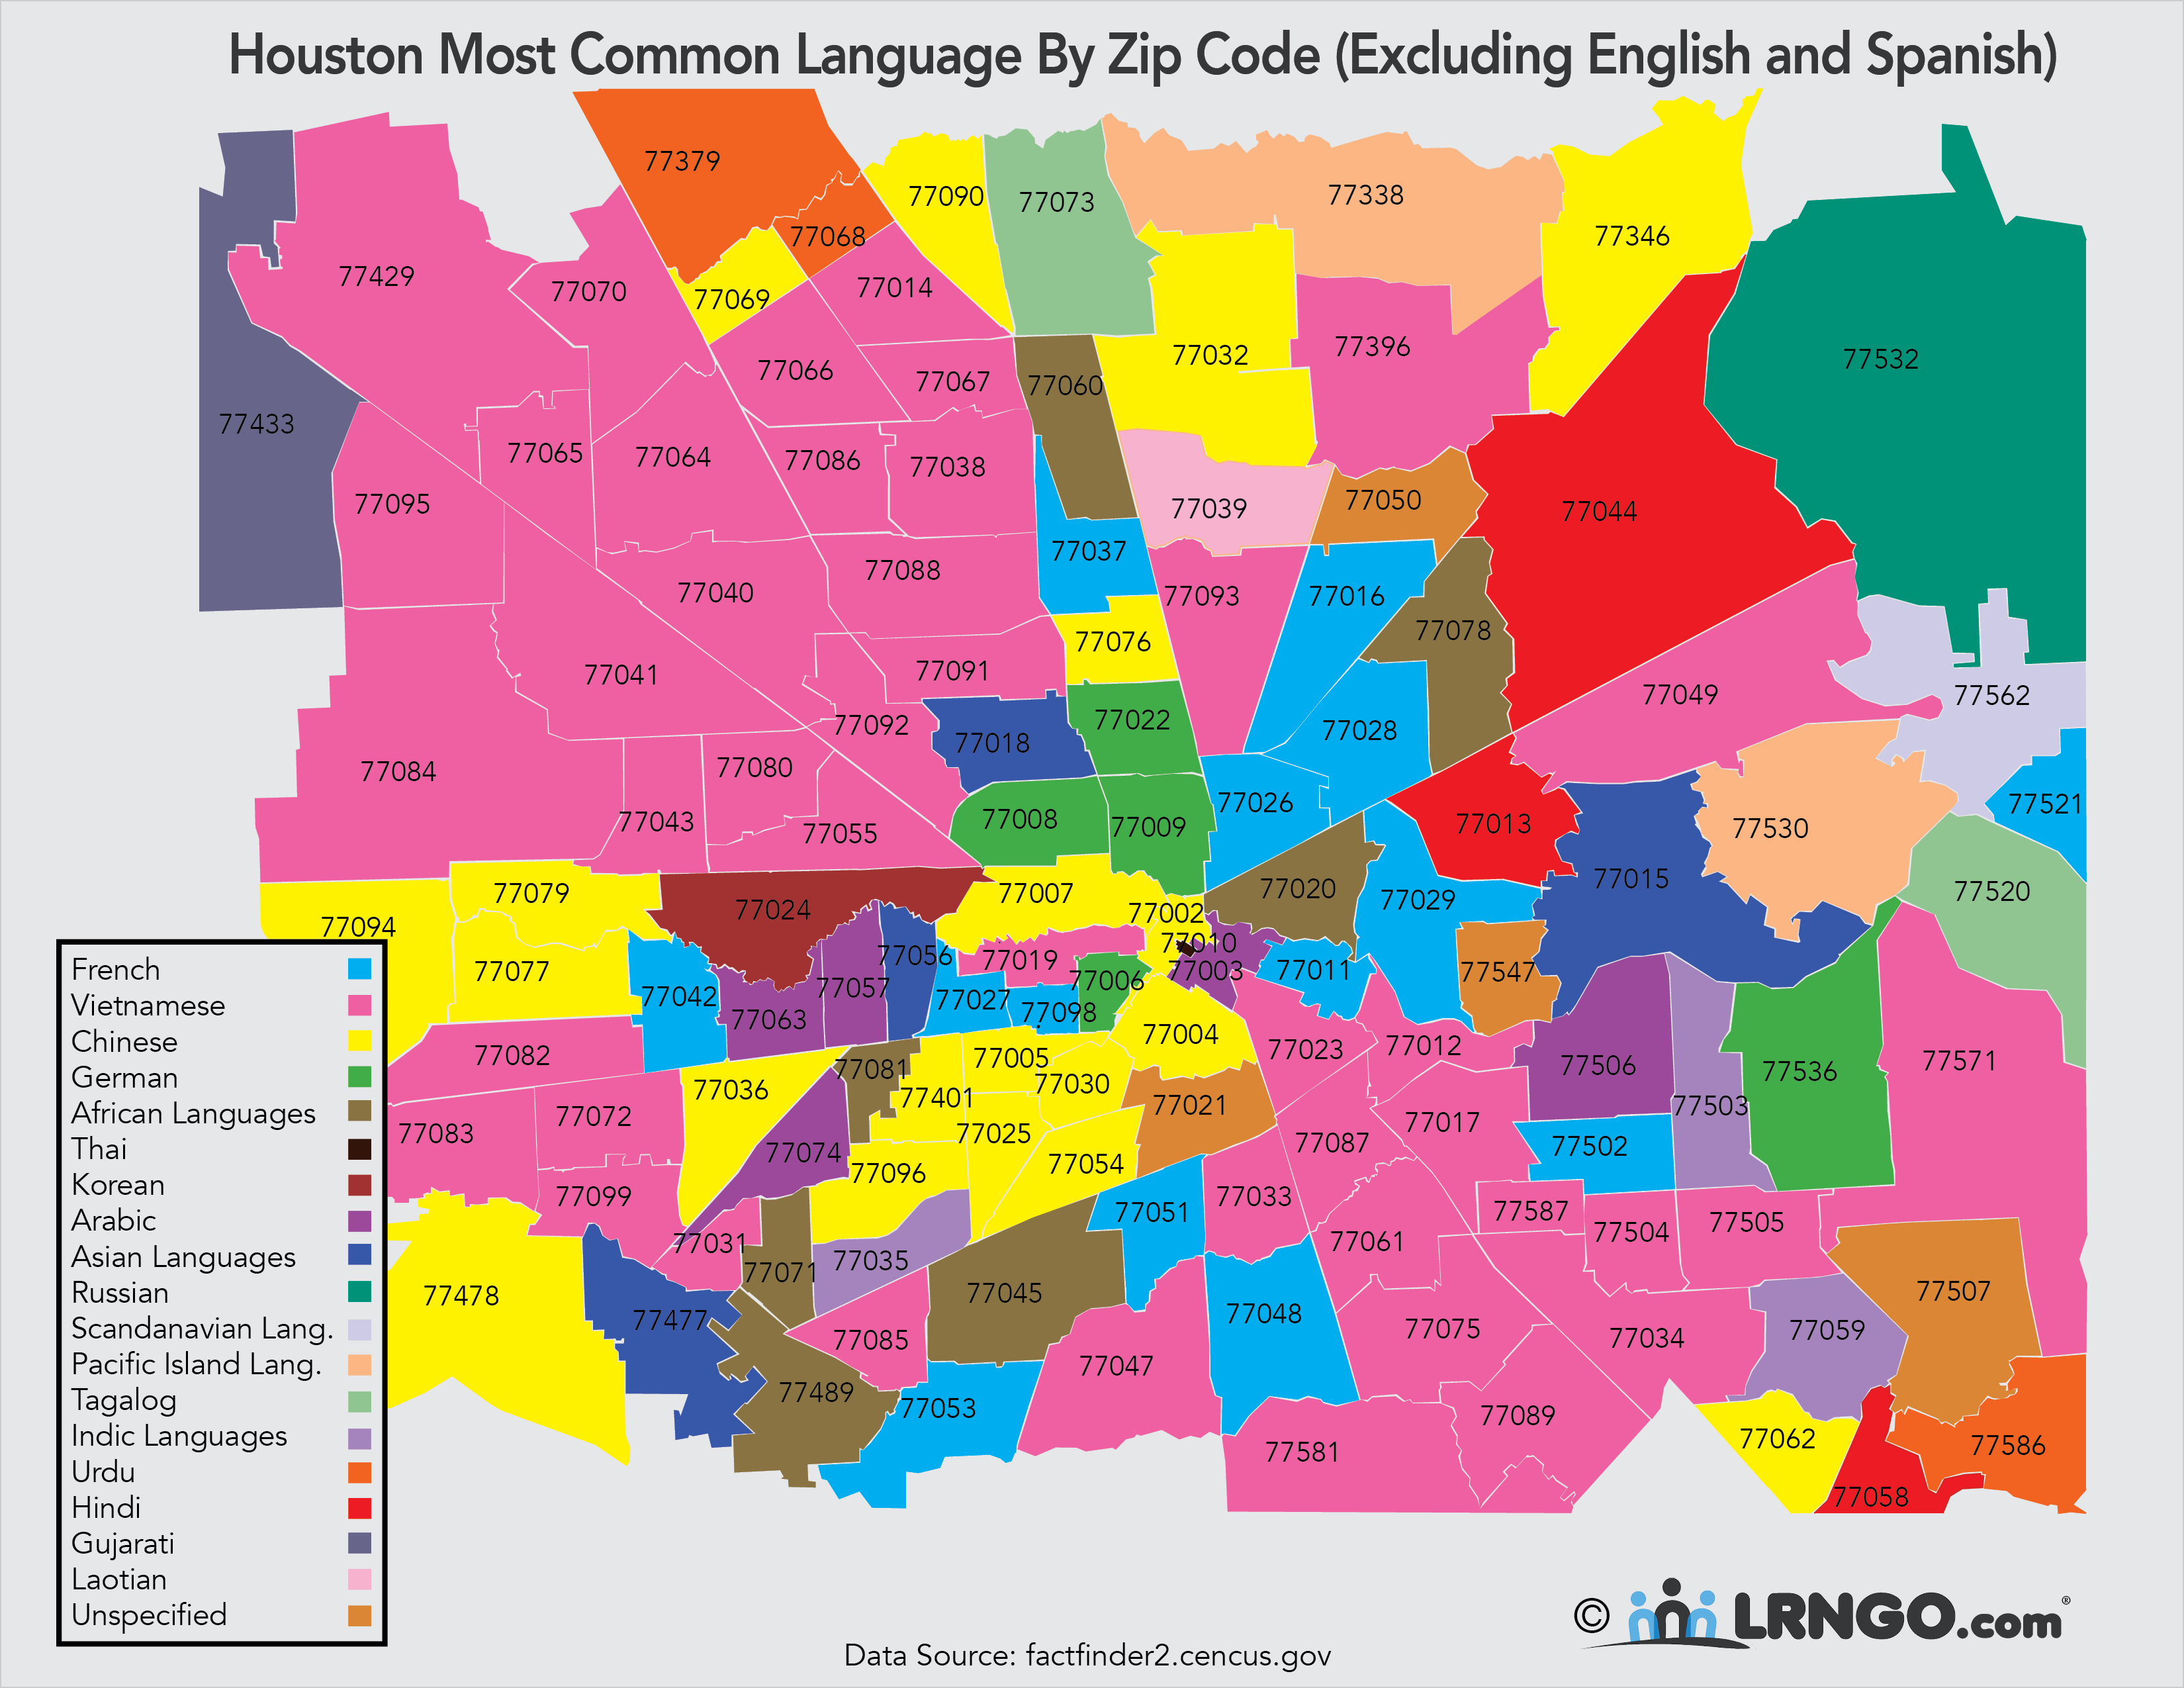 Most common languages spoken in each Houston zip code other than Spanish.